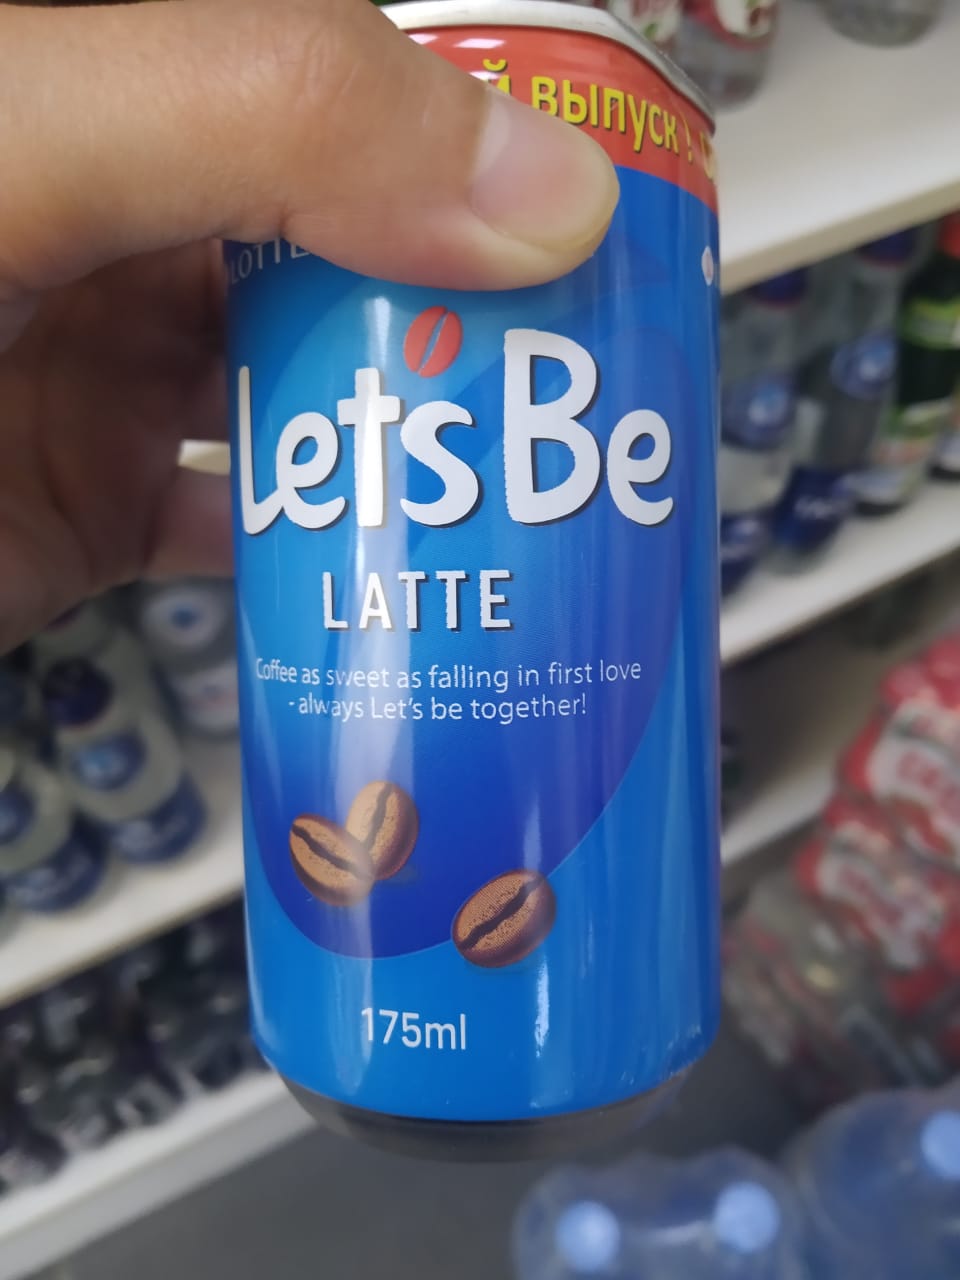 blue canned coffee drink with text "coffee as sweet as falling in first love - always Let's be together" on it 